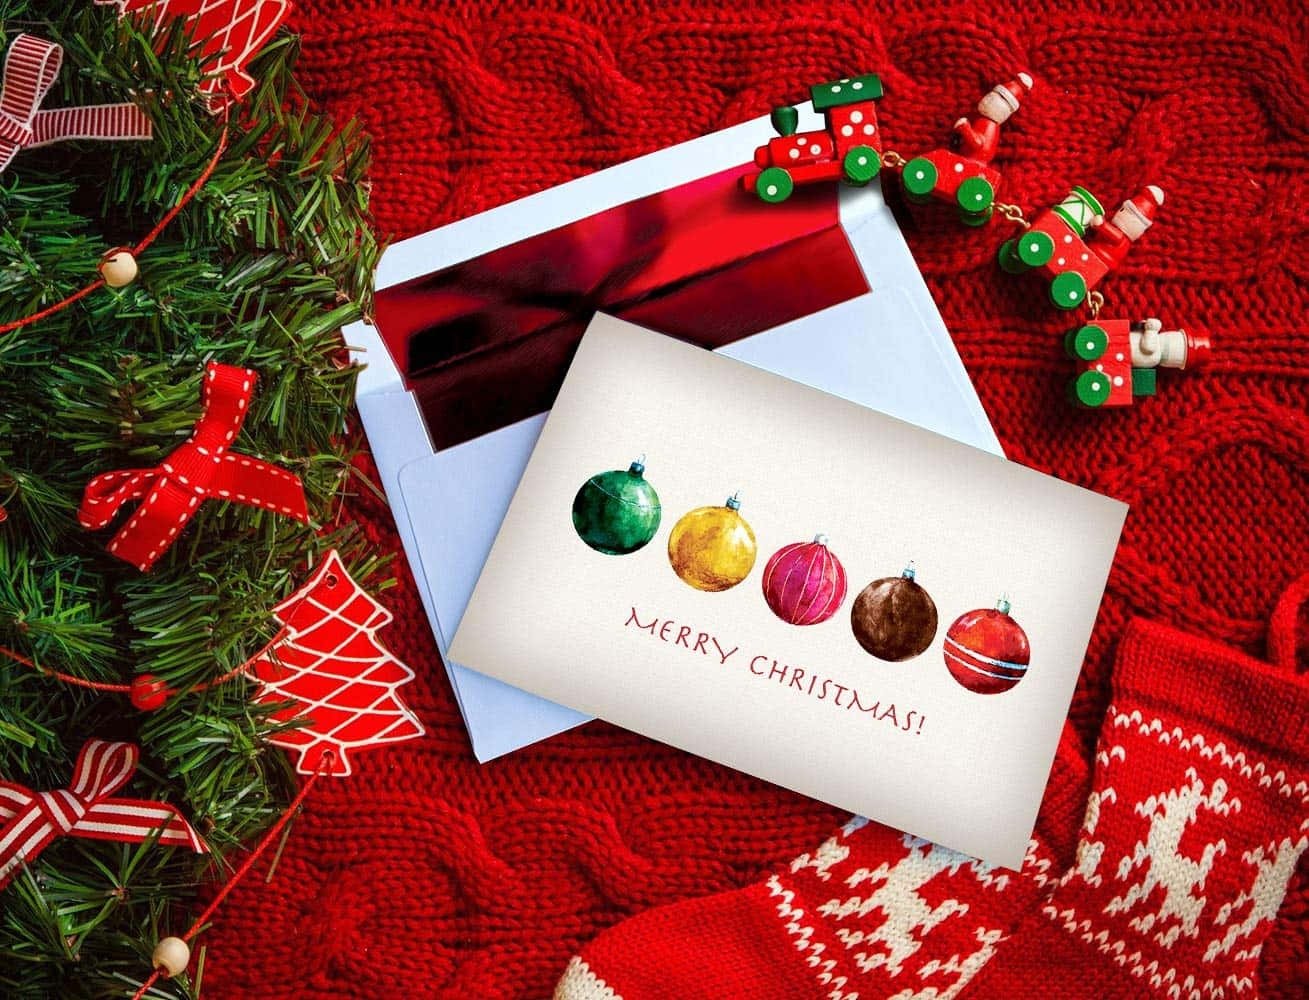 Spread some Holiday cheer with a beautiful Christmas Card!